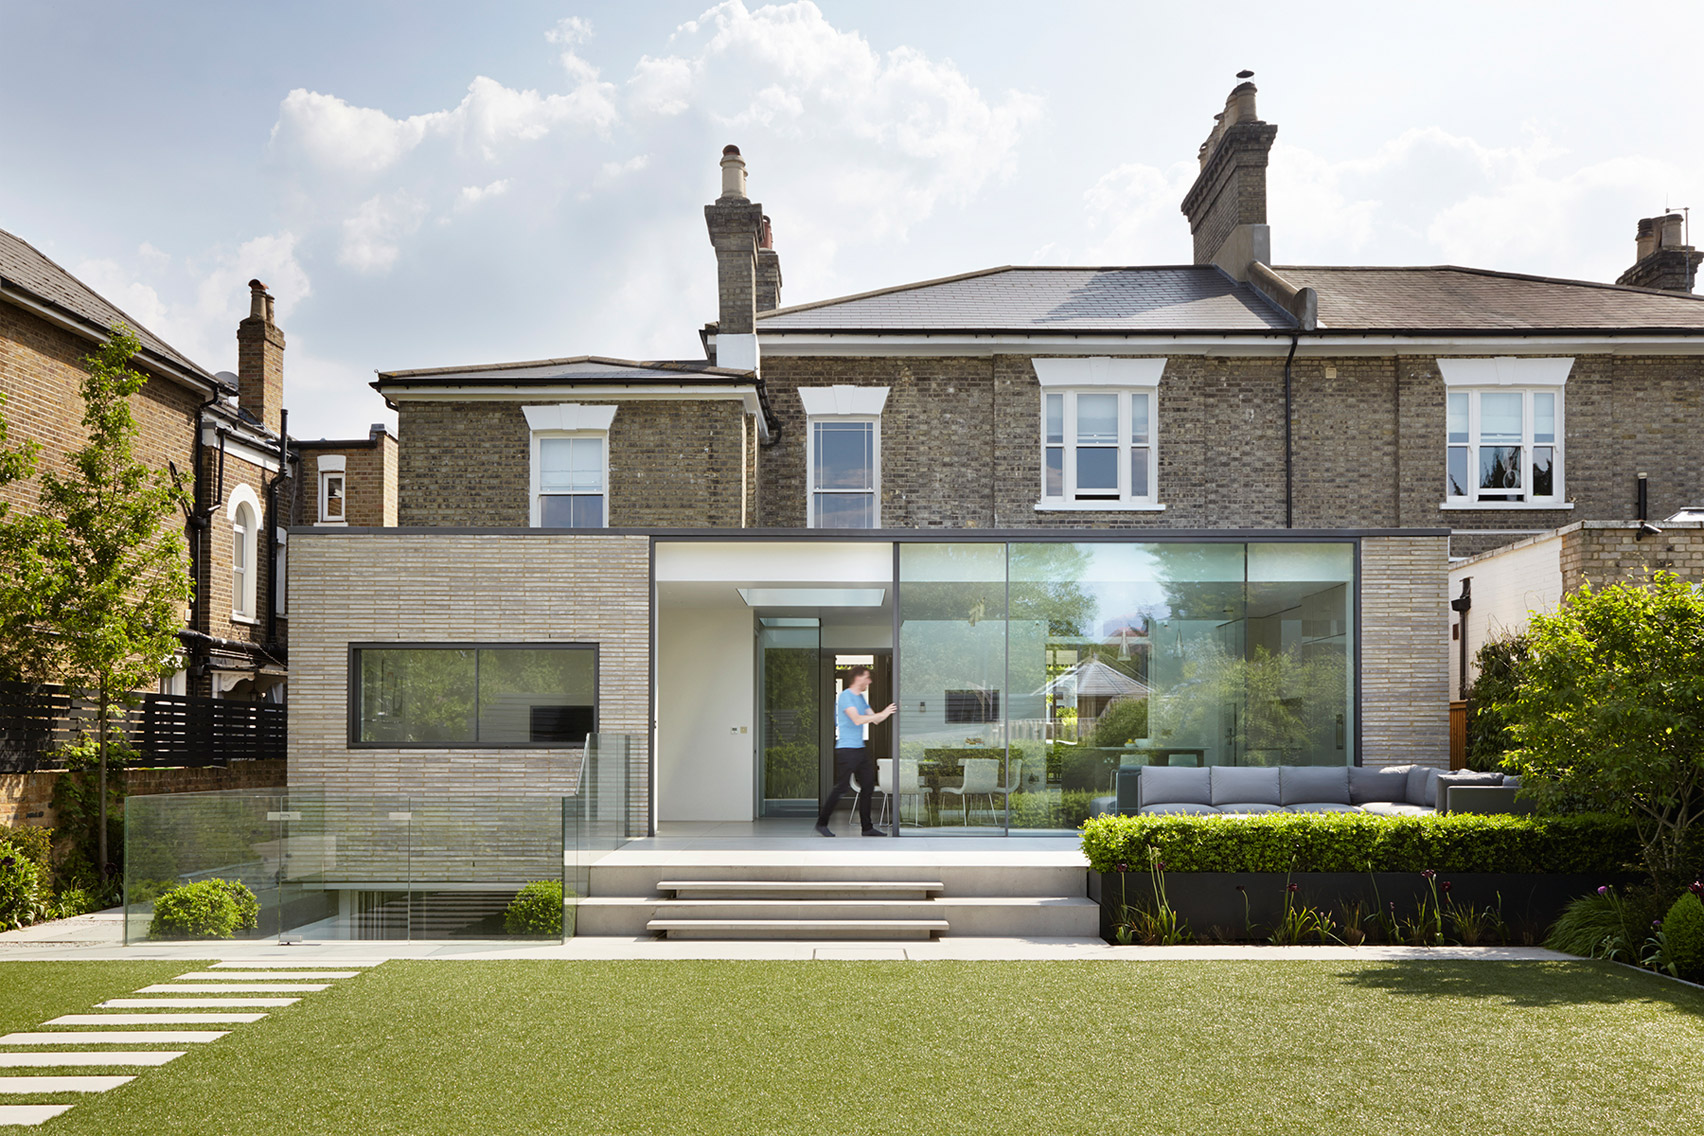 Studio Octopi adds glass-fronted extension to White Lodge house in London